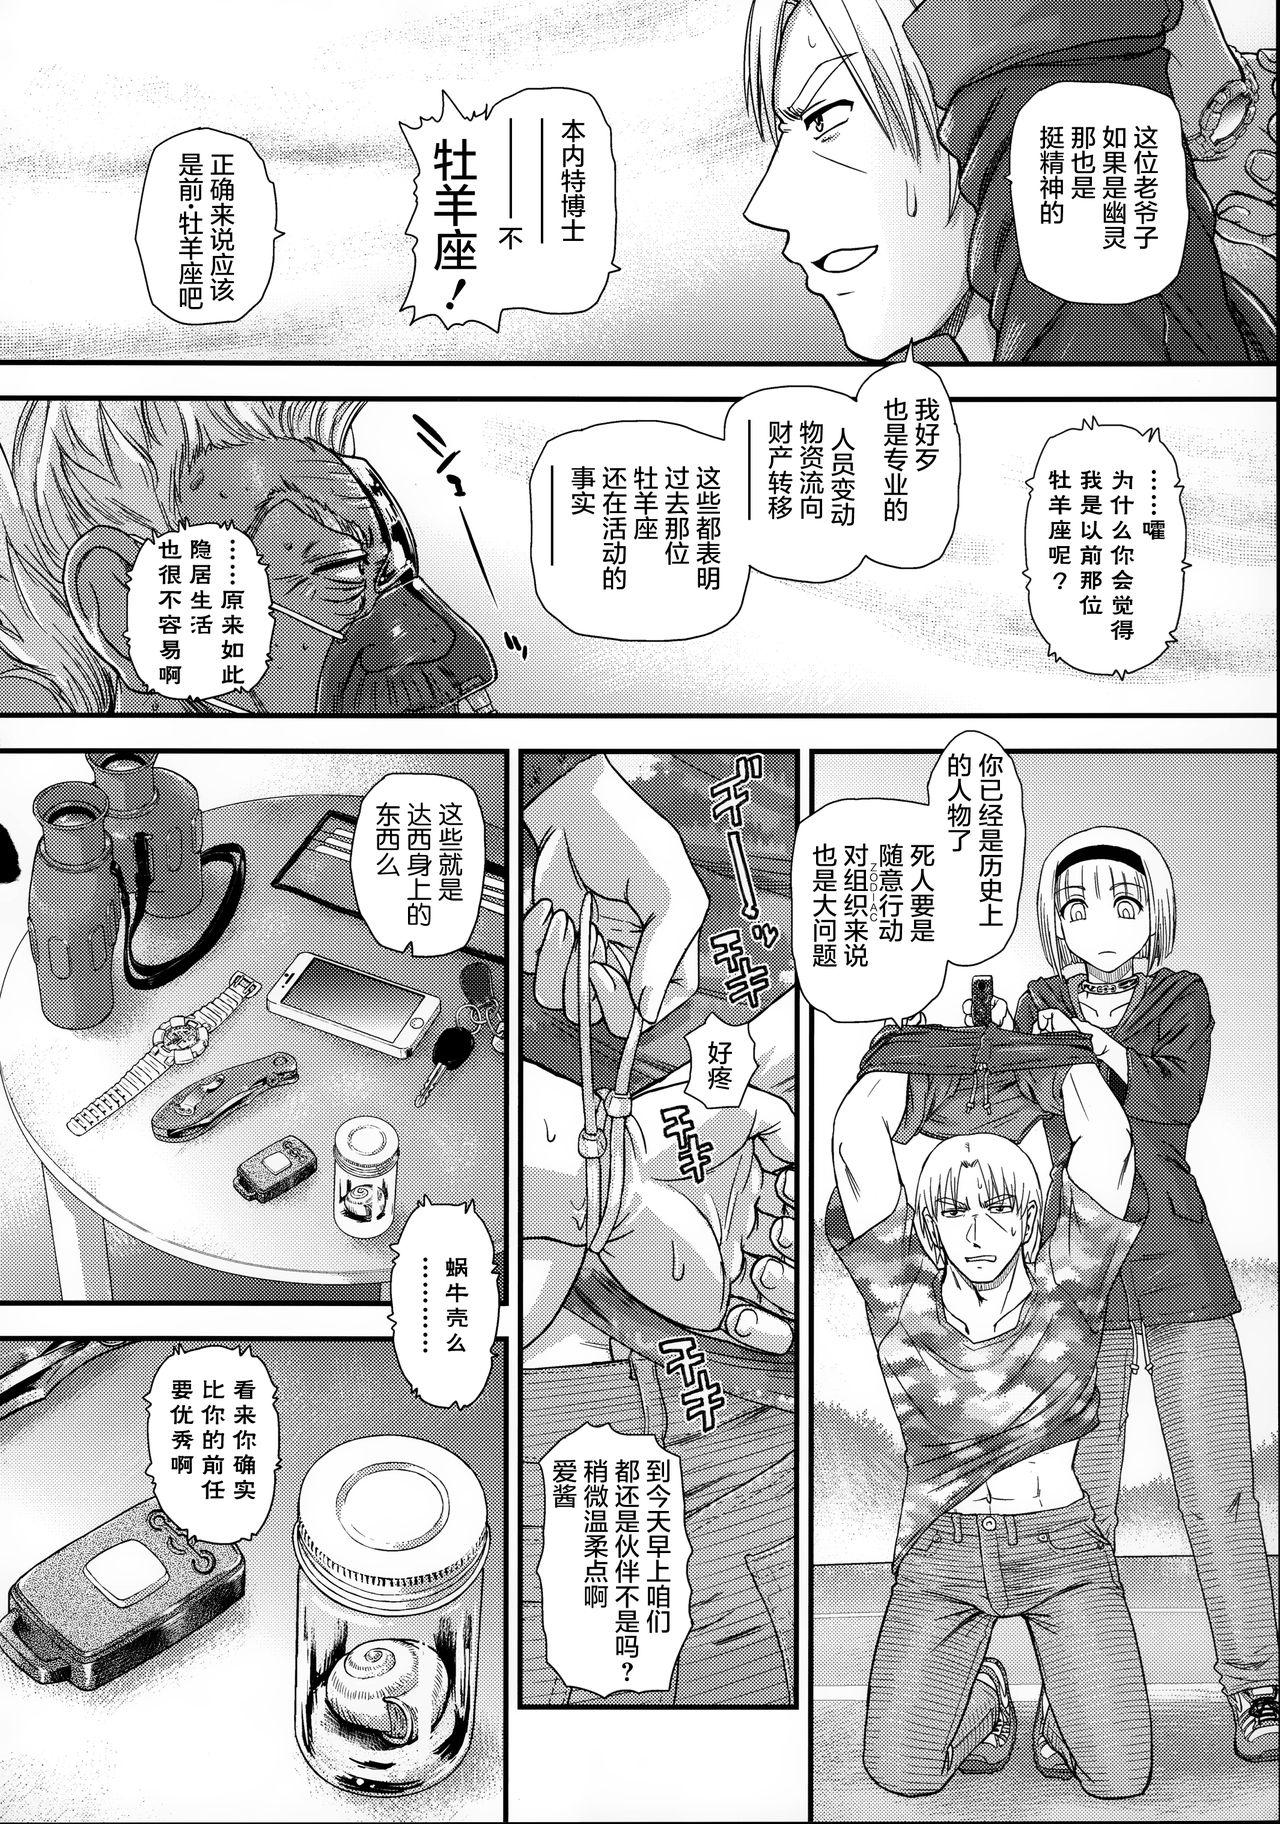 Handjob (C95) [Behind Moon (Dulce-Q)] DR:II ep.7 ~Dulce Report~ | 达西报告II Ep.7 [Chinese] [鬼畜王汉化组] - Original The - Page 10